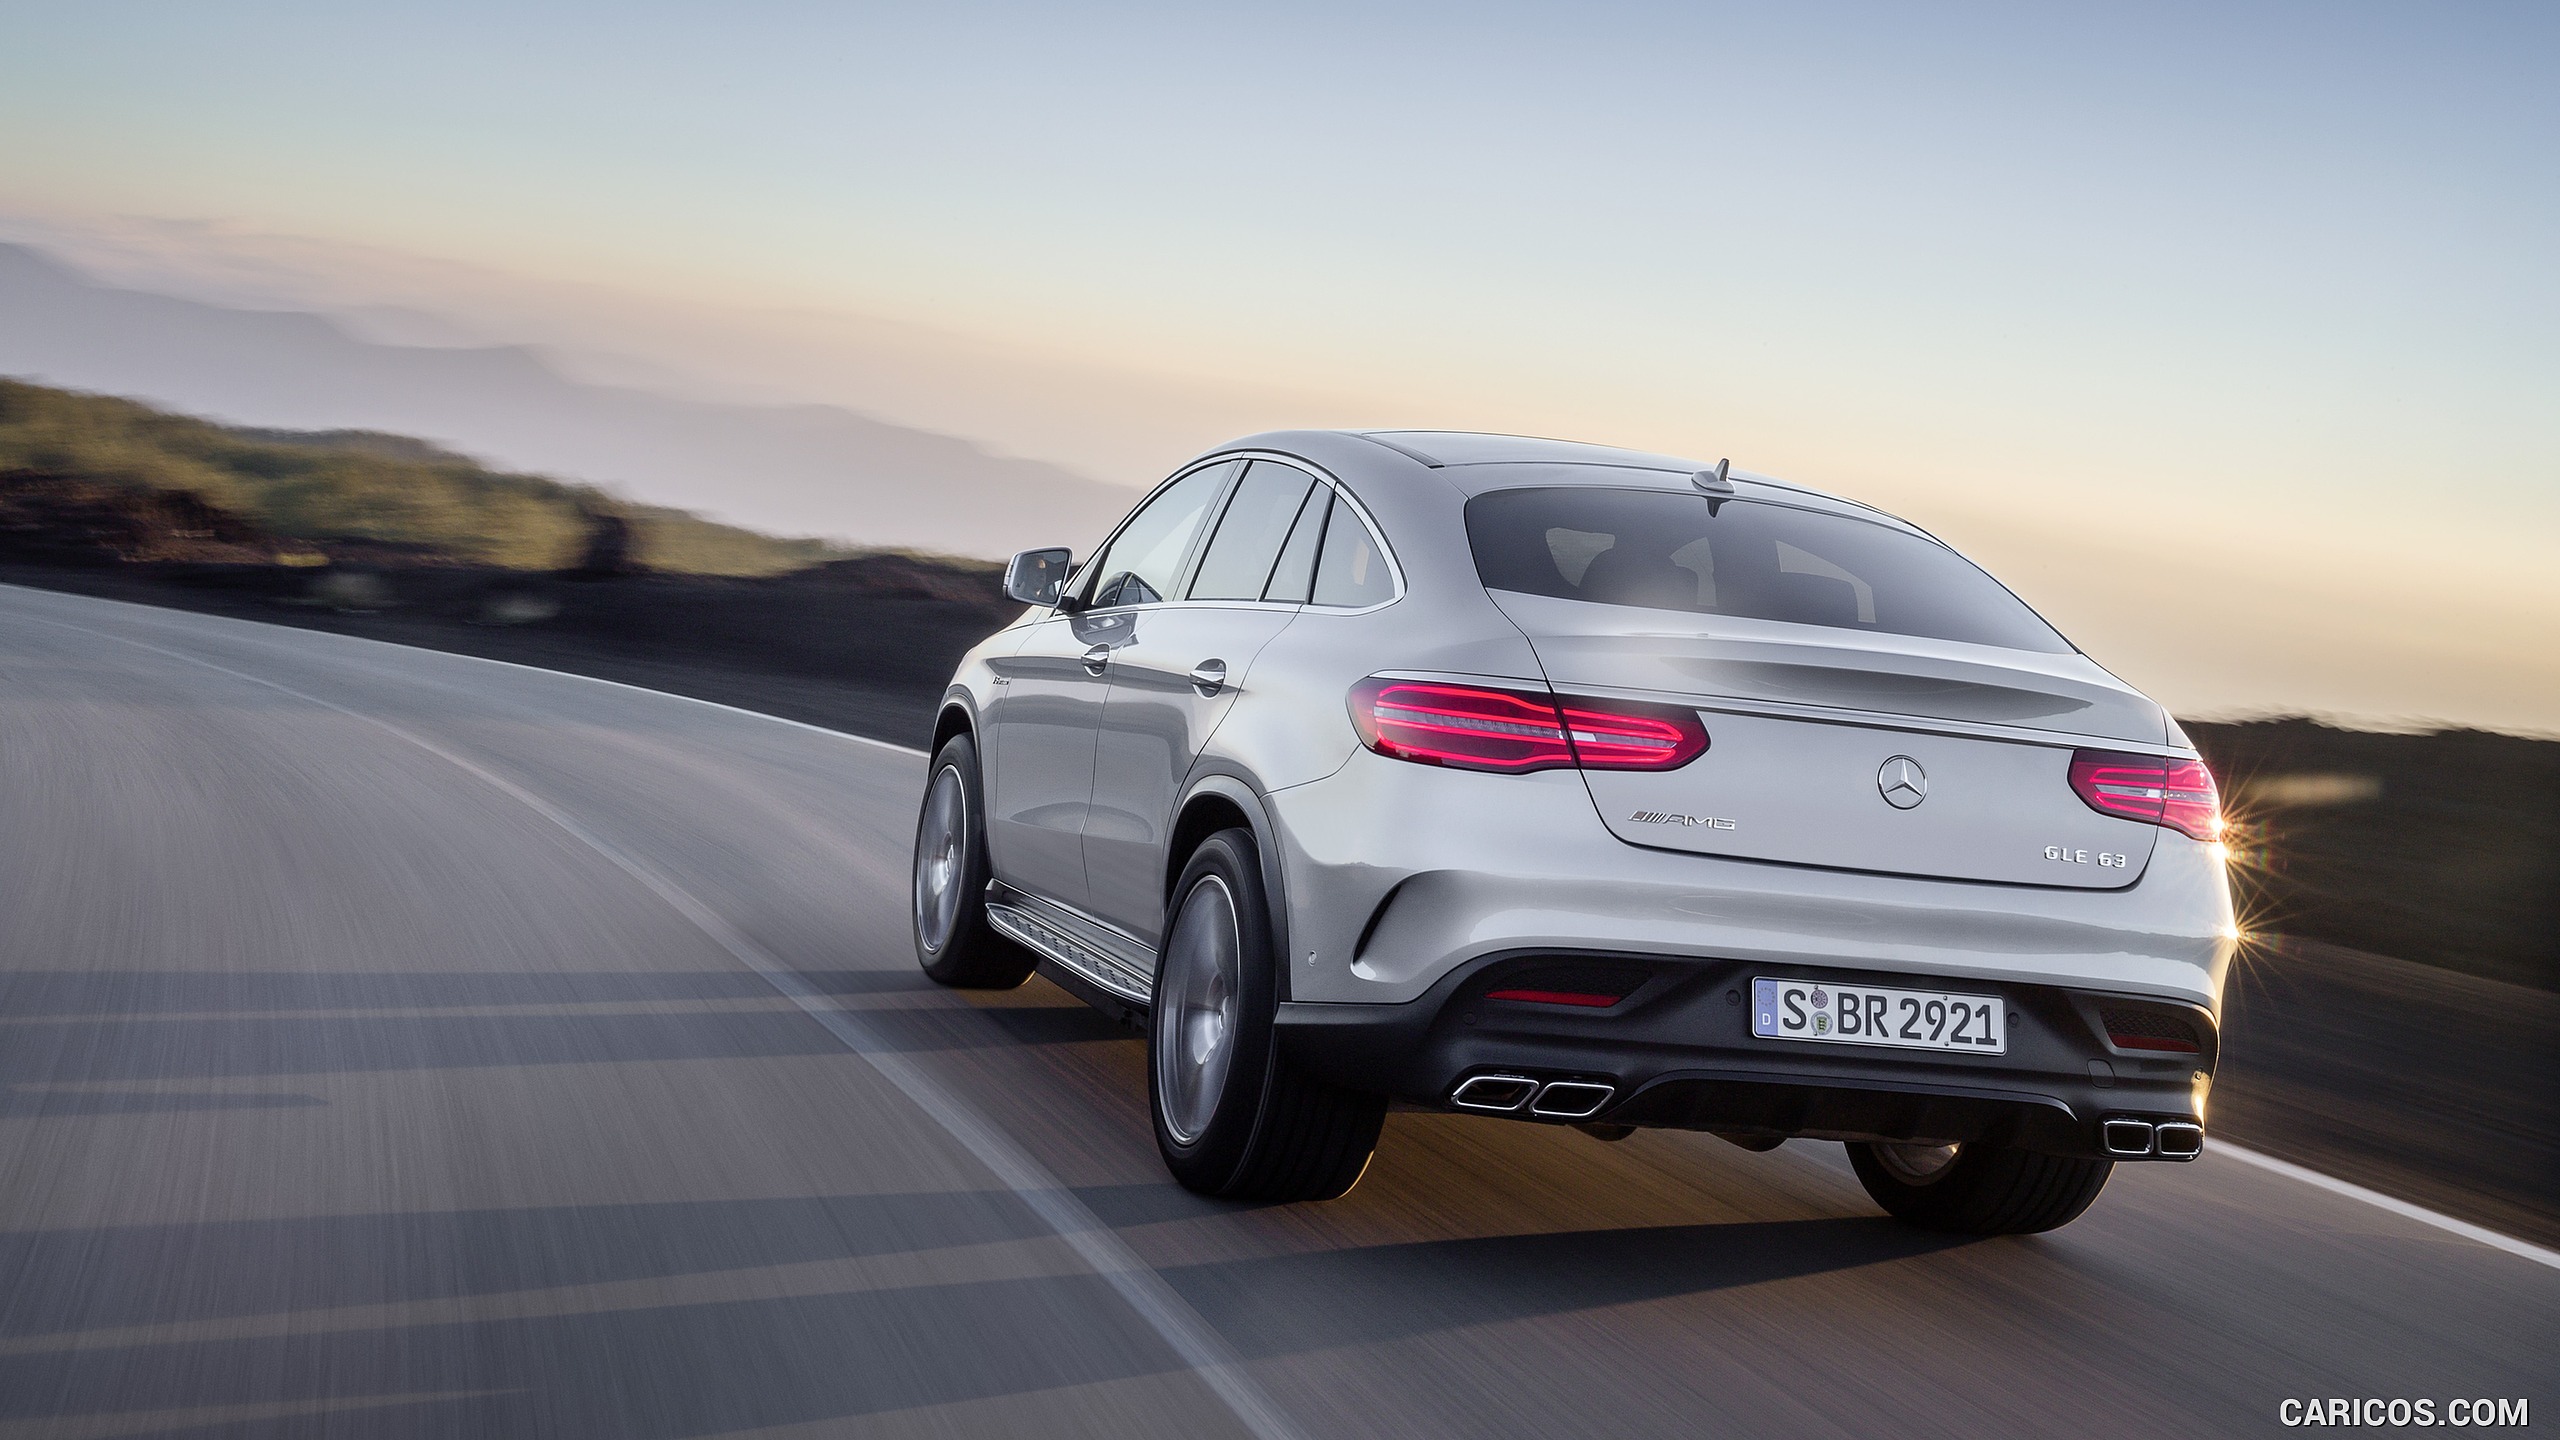 2016 Mercedes-AMG GLE 63 Coupe 4MATIC  - Rear, #16 of 65